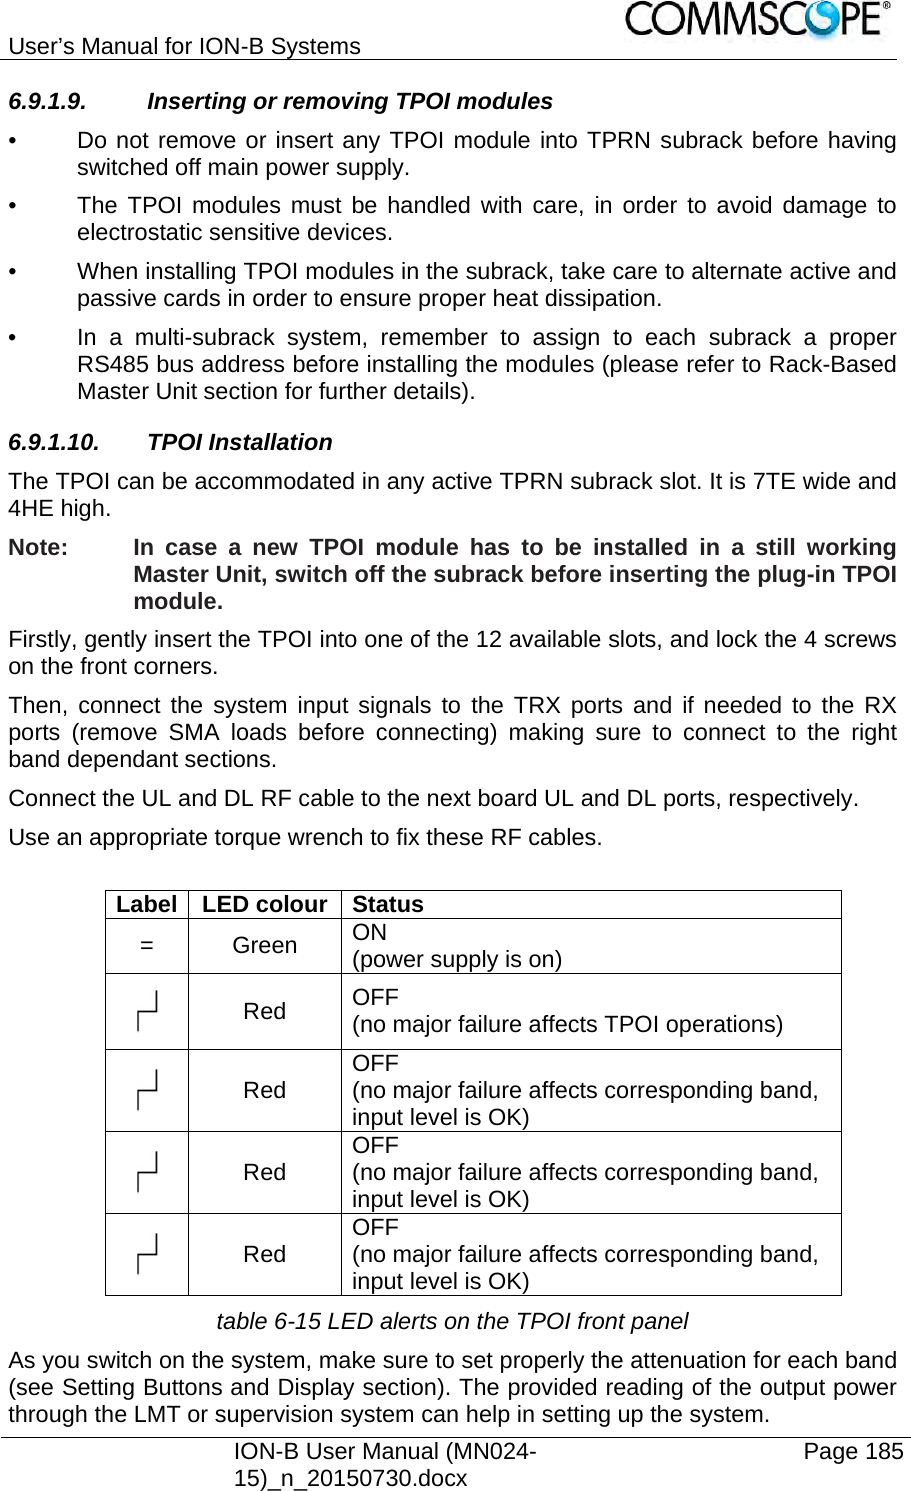 User’s Manual for ION-B Systems    ION-B User Manual (MN024-15)_n_20150730.docx  Page 185 6.9.1.9.  Inserting or removing TPOI modules •  Do not remove or insert any TPOI module into TPRN subrack before having switched off main power supply. •  The TPOI modules must be handled with care, in order to avoid damage to electrostatic sensitive devices. •  When installing TPOI modules in the subrack, take care to alternate active and passive cards in order to ensure proper heat dissipation. •  In a multi-subrack system, remember to assign to each subrack a proper RS485 bus address before installing the modules (please refer to Rack-Based Master Unit section for further details). 6.9.1.10. TPOI Installation The TPOI can be accommodated in any active TPRN subrack slot. It is 7TE wide and 4HE high. Note:  In case a new TPOI module has to be installed in a still working Master Unit, switch off the subrack before inserting the plug-in TPOI module.  Firstly, gently insert the TPOI into one of the 12 available slots, and lock the 4 screws on the front corners. Then, connect the system input signals to the TRX ports and if needed to the RX ports (remove SMA loads before connecting) making sure to connect to the right band dependant sections. Connect the UL and DL RF cable to the next board UL and DL ports, respectively.  Use an appropriate torque wrench to fix these RF cables.  Label LED colour Status = Green ON (power supply is on)  Red  OFF (no major failure affects TPOI operations)  Red  OFF (no major failure affects corresponding band, input level is OK)  Red  OFF (no major failure affects corresponding band, input level is OK)  Red  OFF (no major failure affects corresponding band, input level is OK) table 6-15 LED alerts on the TPOI front panel As you switch on the system, make sure to set properly the attenuation for each band (see Setting Buttons and Display section). The provided reading of the output power through the LMT or supervision system can help in setting up the system. 